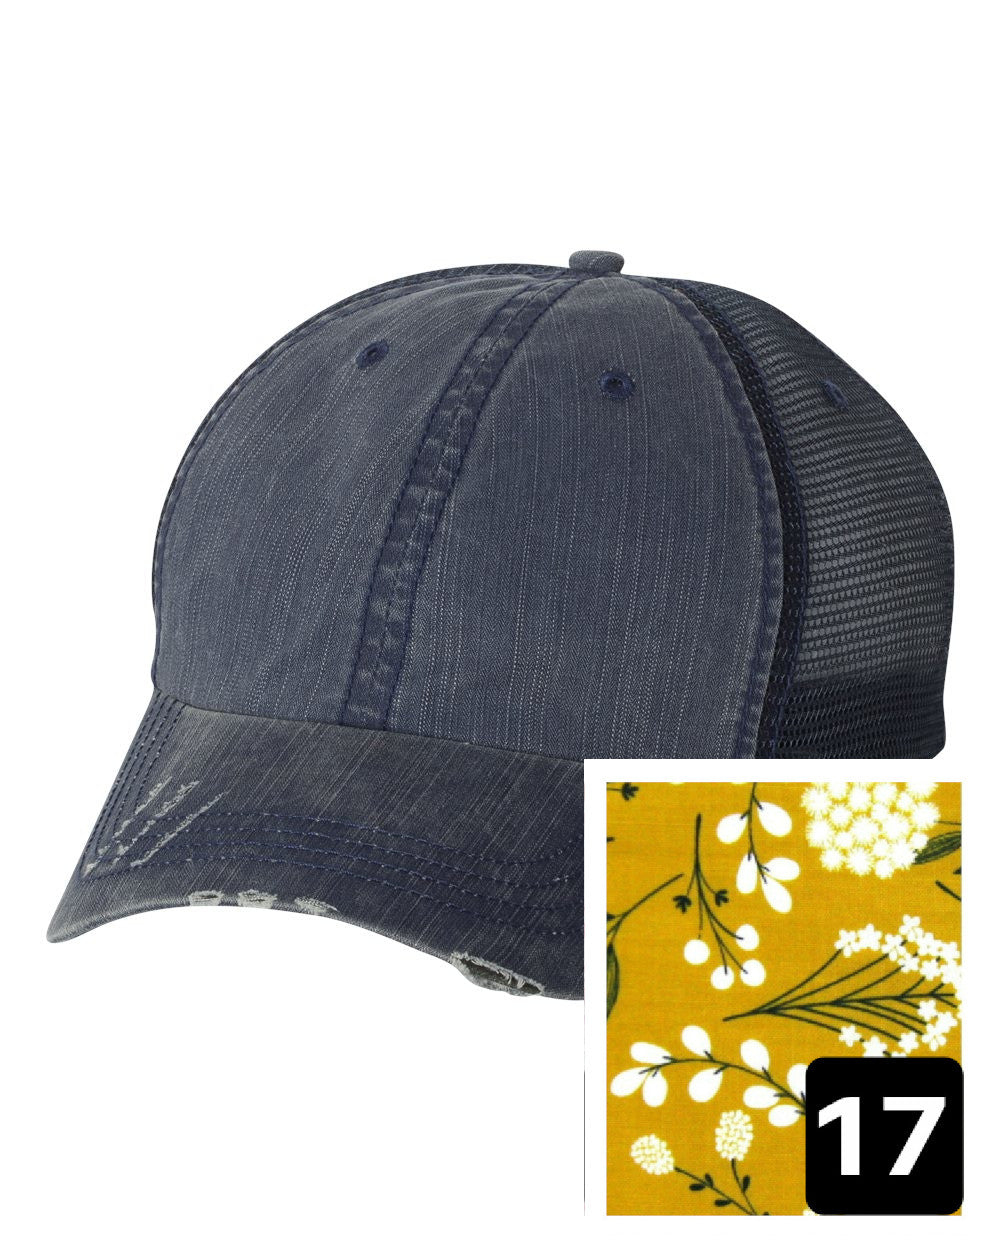 Wisconsin Hat | Navy Distressed Trucker Cap | Many Fabric Choices